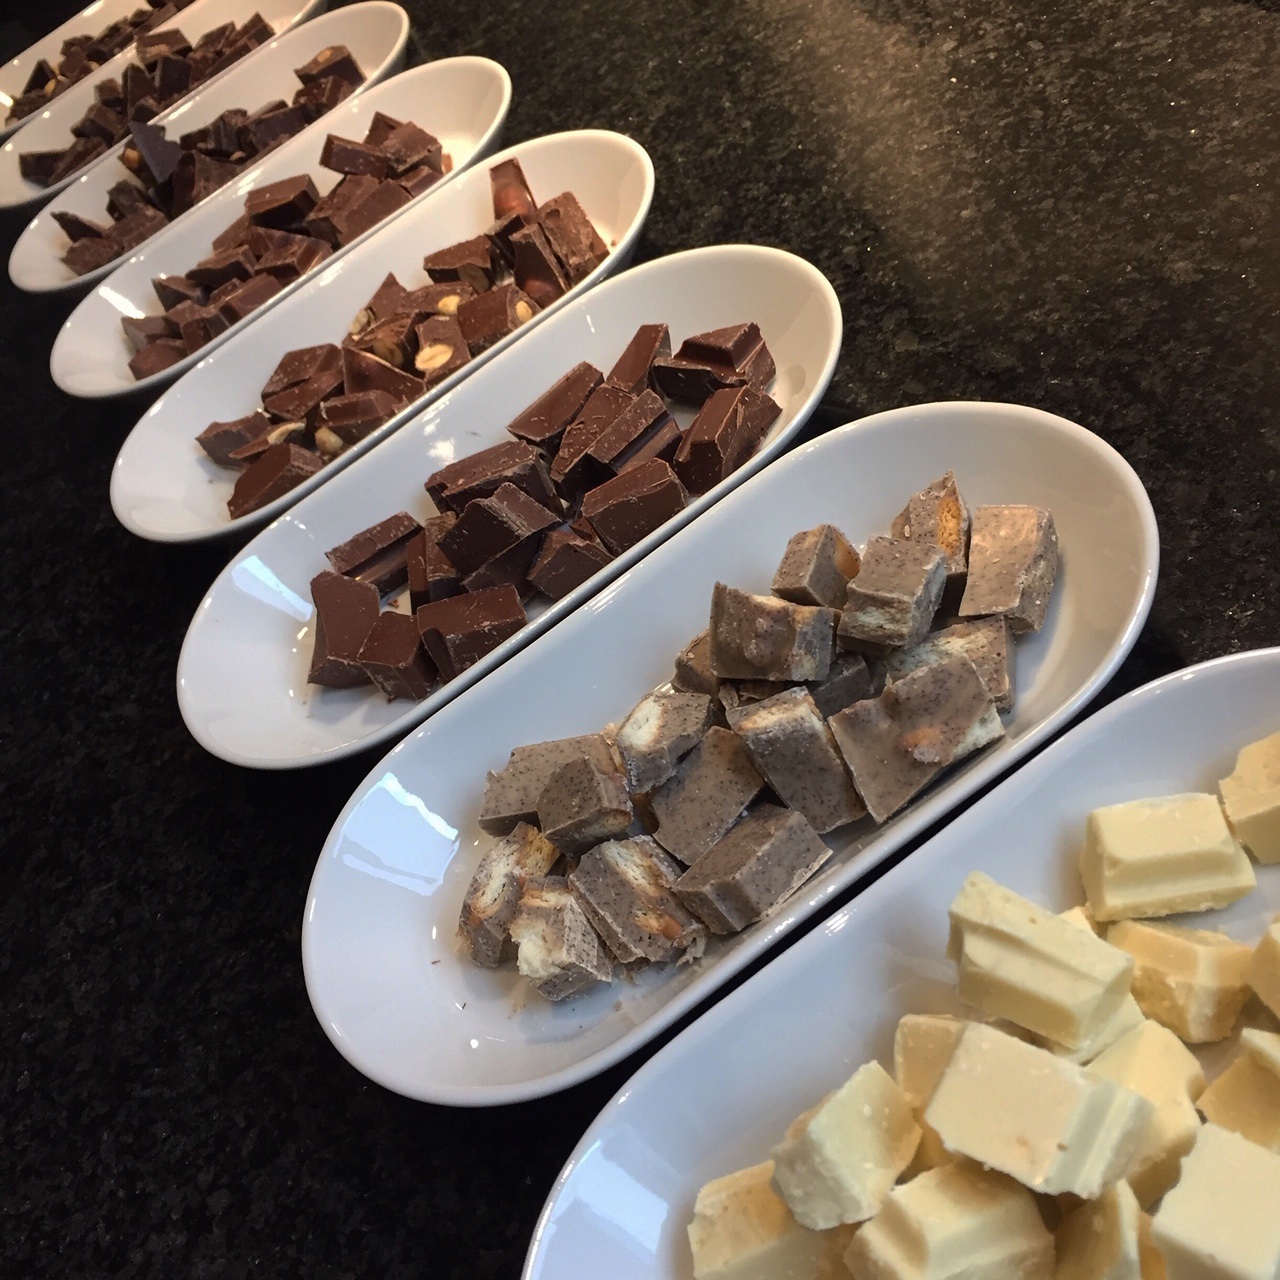 Chocolate used for the different workshops